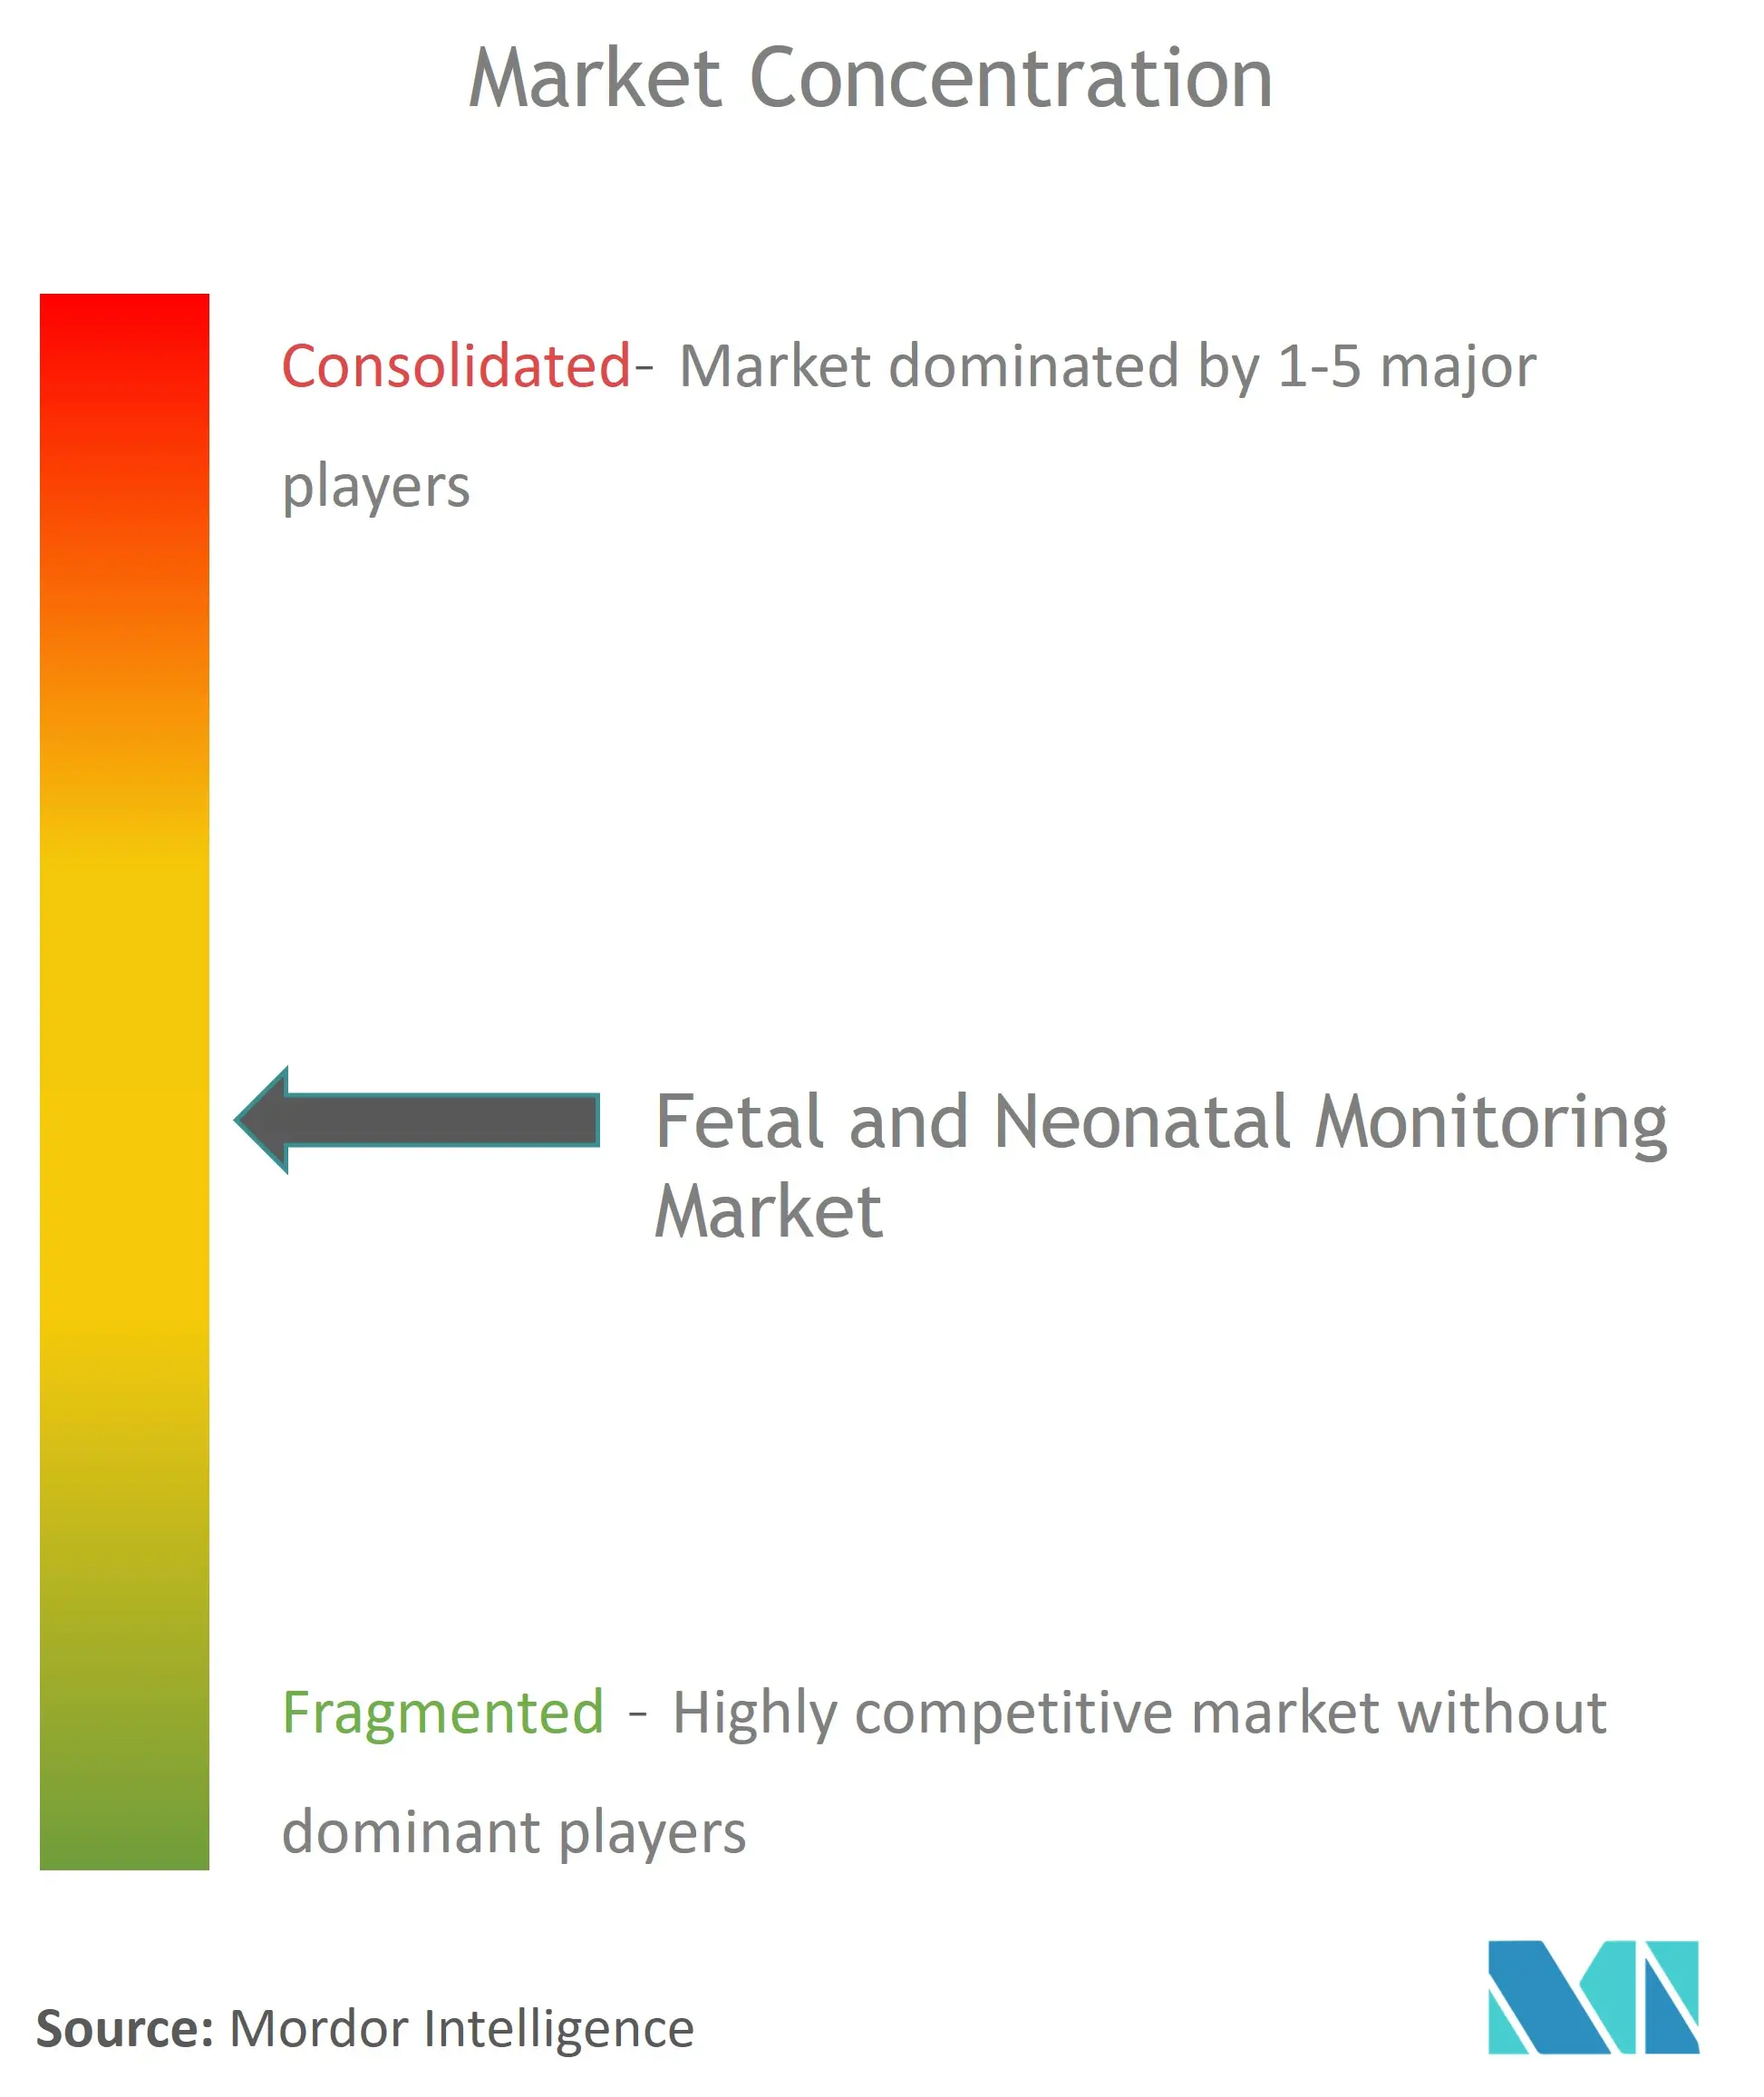 Global Fetal and Neonatal Monitoring Market Concentration